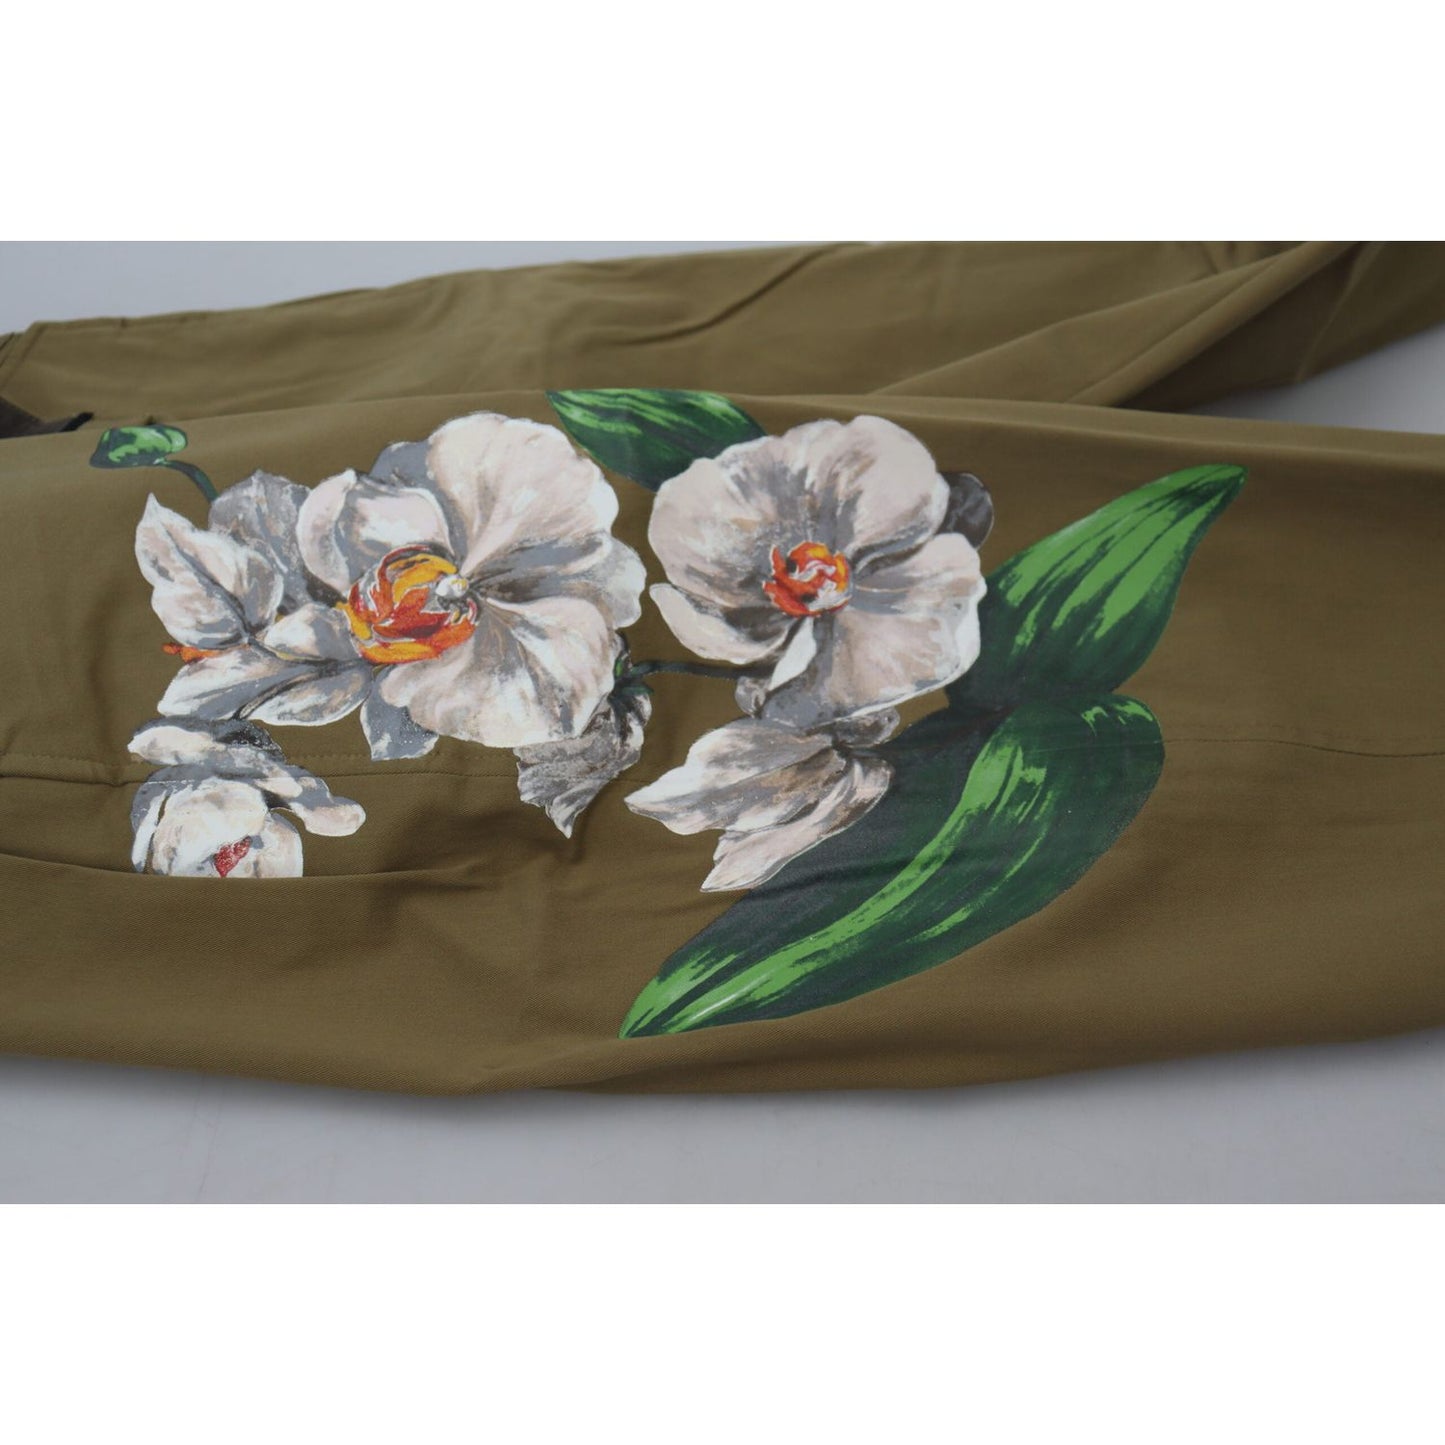 Dolce & Gabbana Exquisite Floral Beige Chino Pants beige-cotton-stretch-floral-chinos-pants